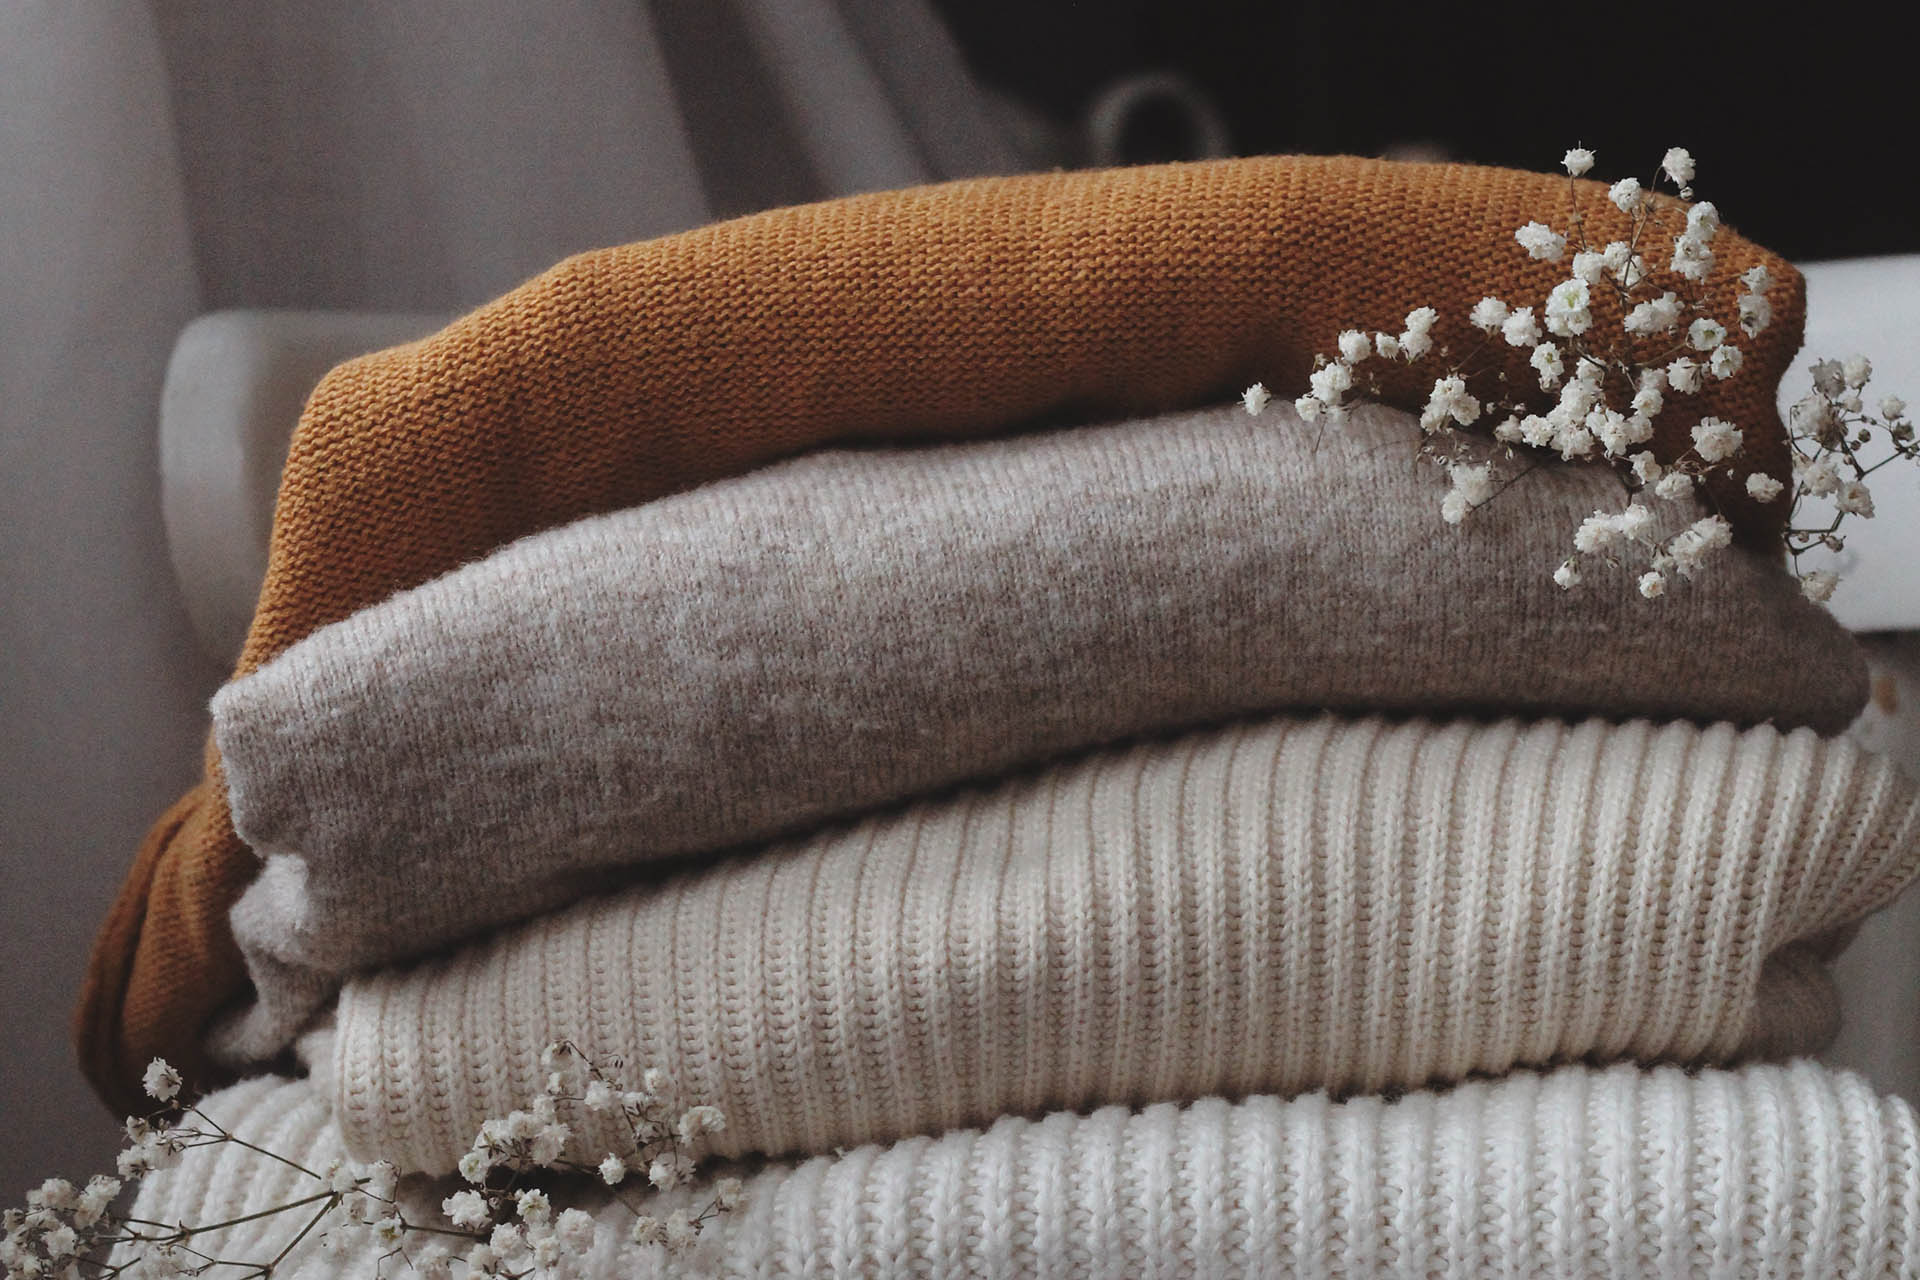 Four thick sweaters in white, beige and rust brown that are folded nicely. Two white flower twigs lie on the clothes for decoration